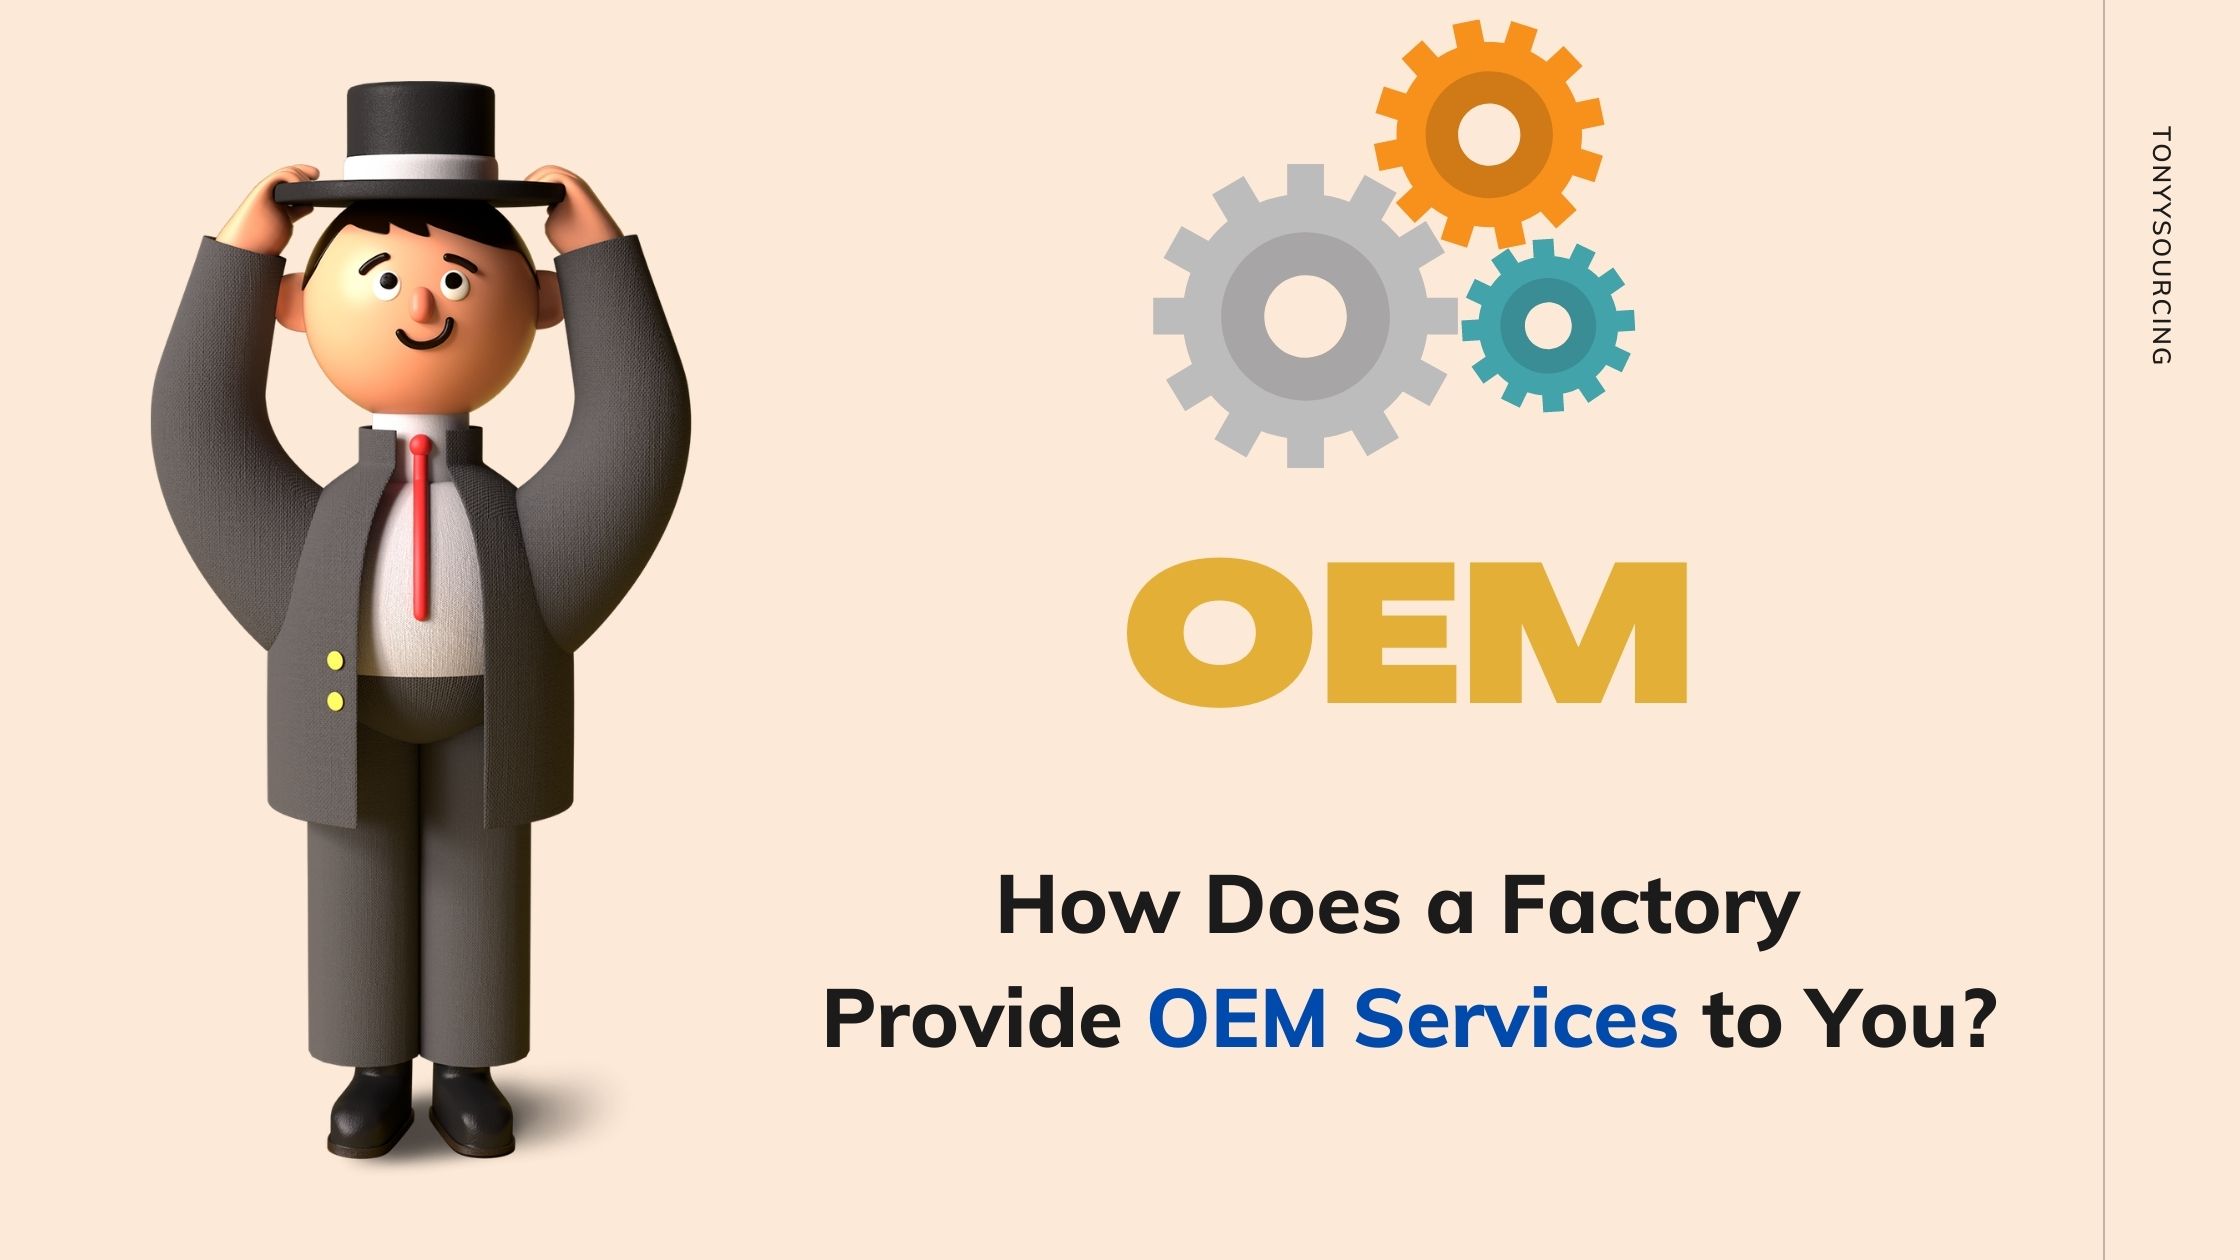 You are currently viewing OEM: What Does It Mean? How Does a Factory Provide OEM Services to You?